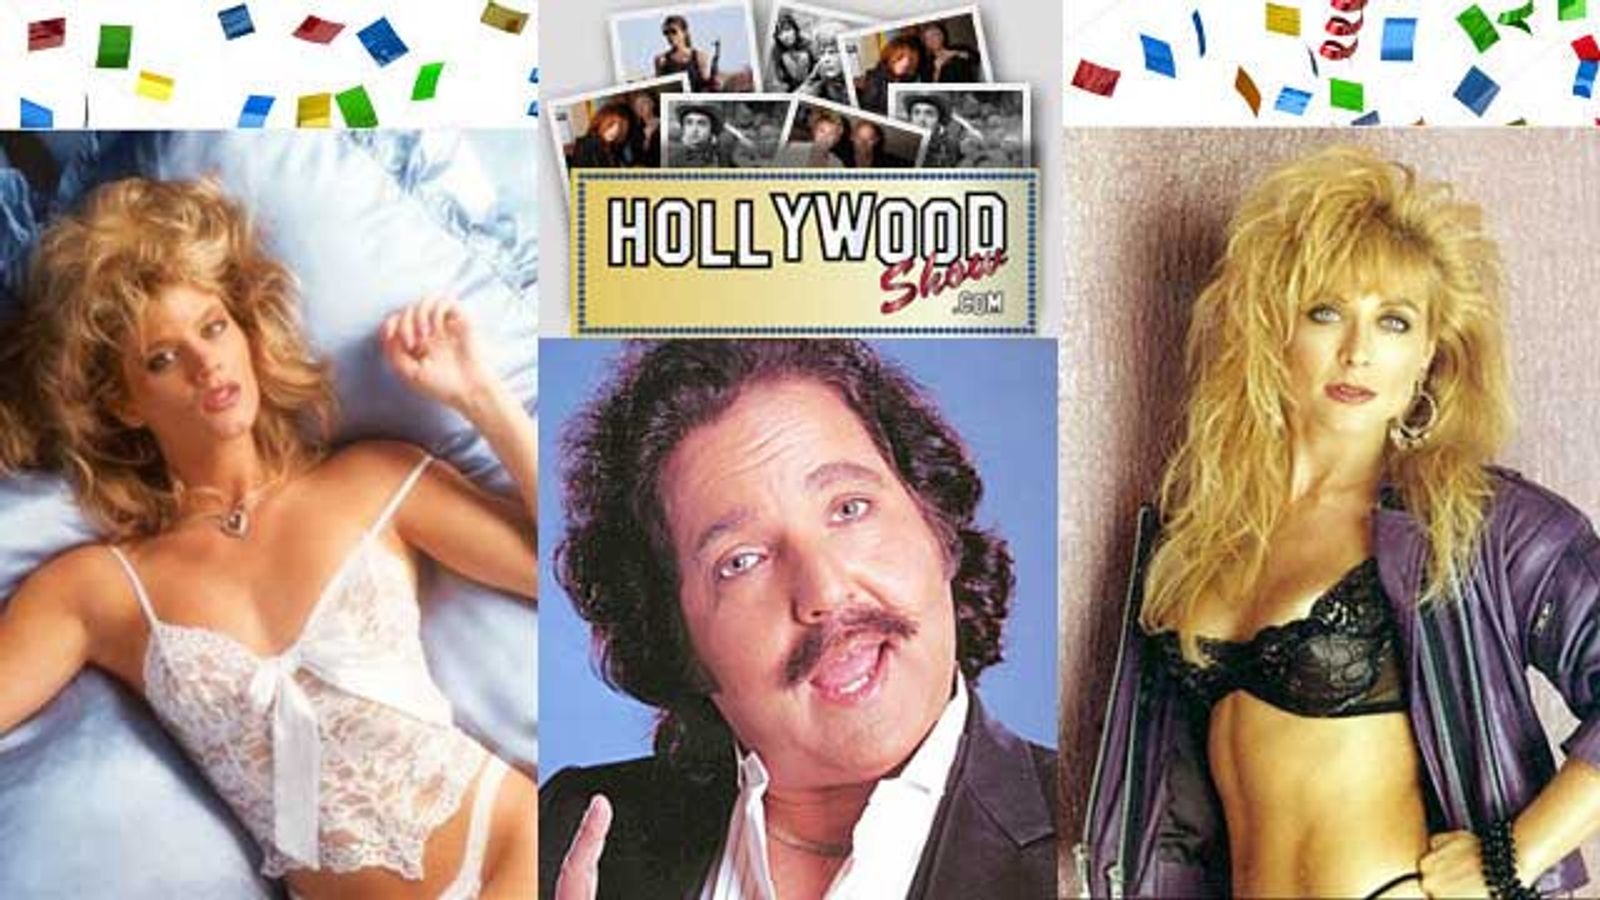 Legends of XXX to Sign at Hollywood Show Jan. 3-5—UPDATED